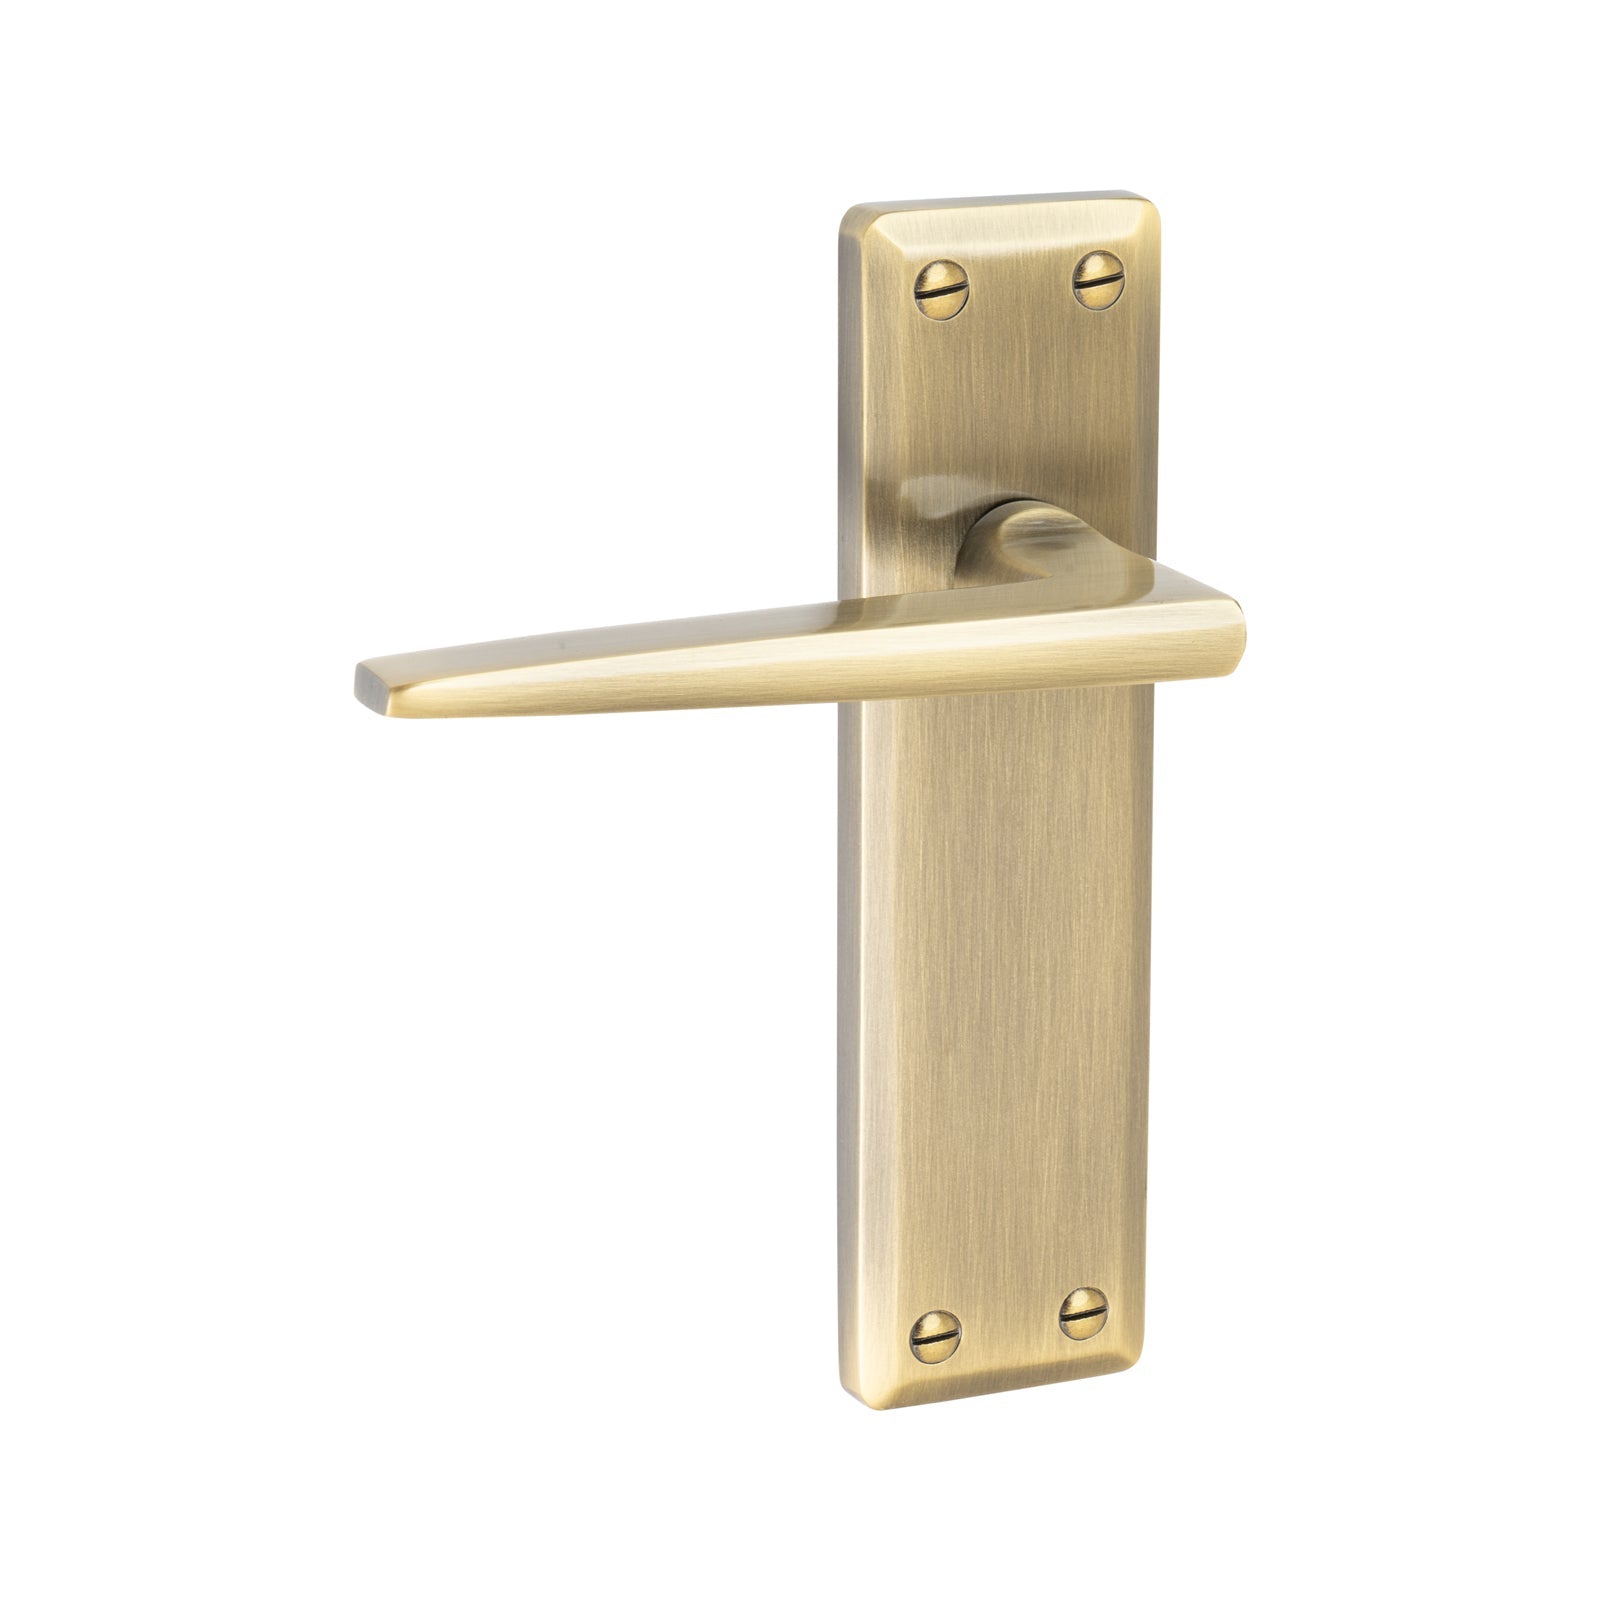 Kendal Door Handles On Plate Latch Handle in Aged Brass SHOW